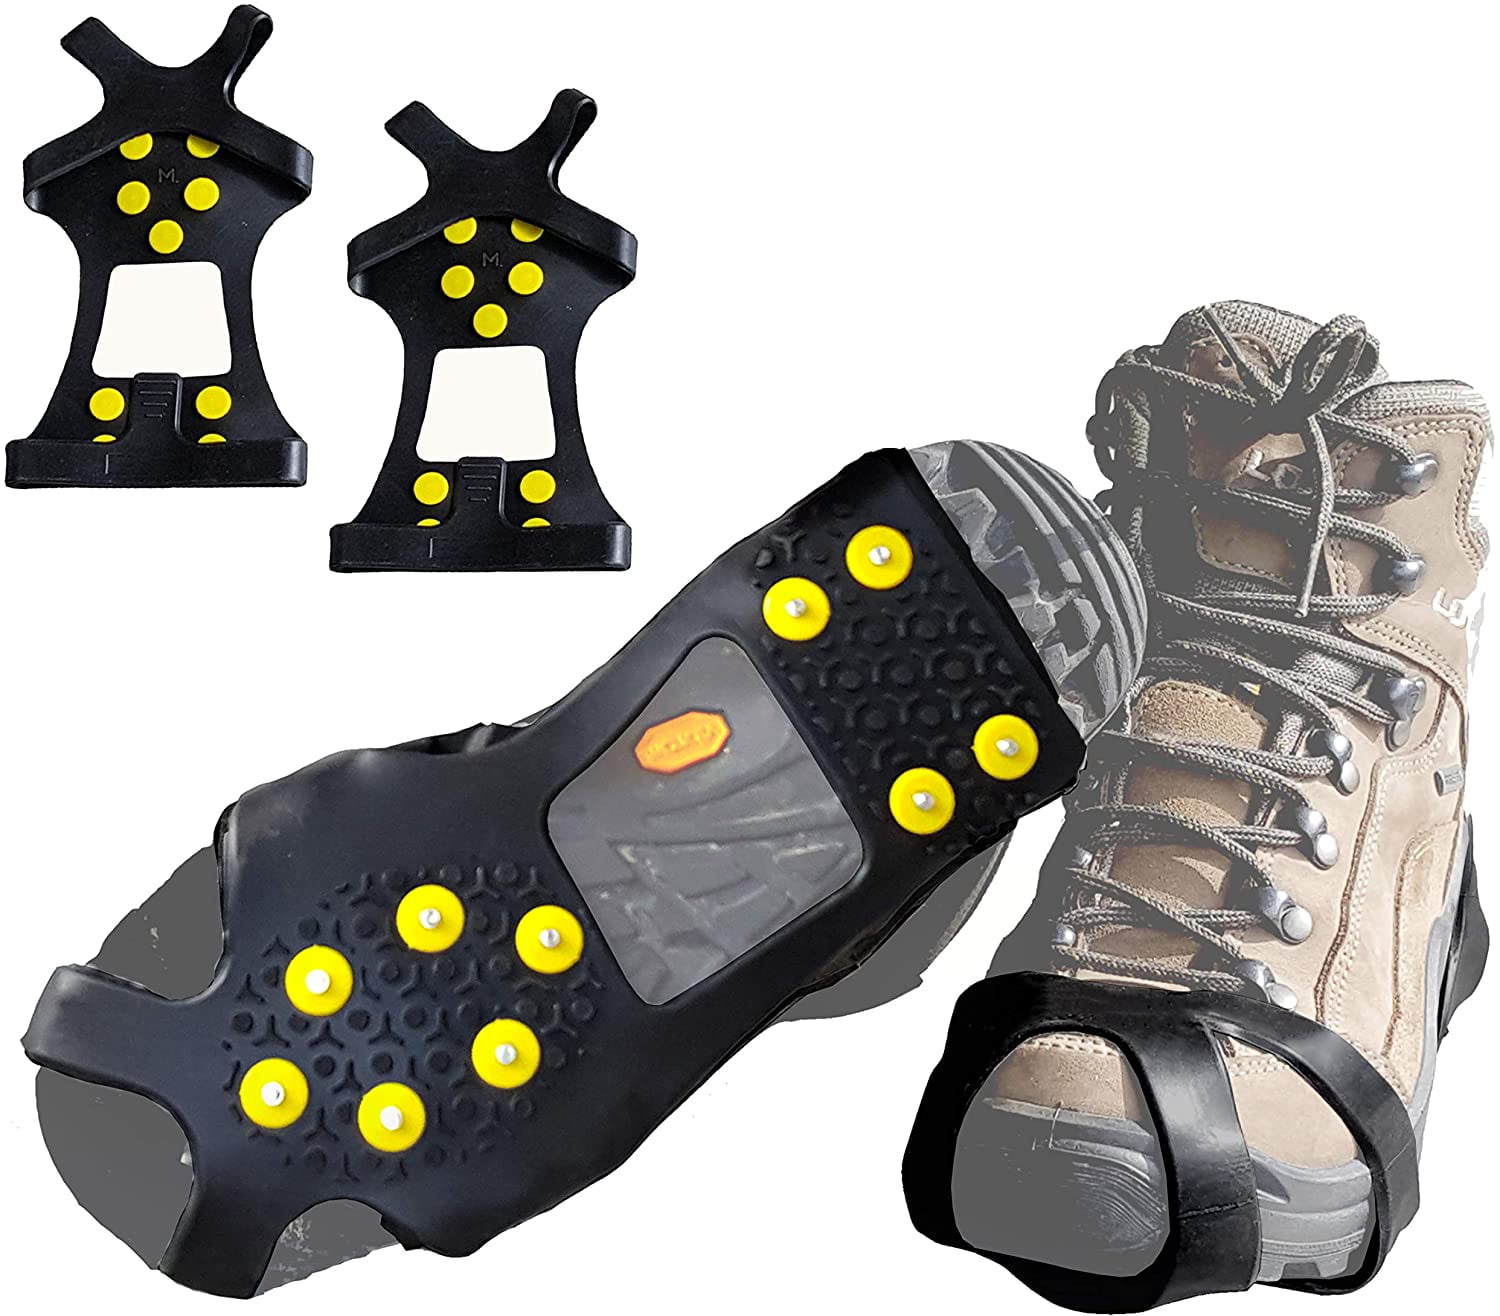 LARGE LIGHT-UP ICE TRACTION SLIP-ONS WALKING AID SNOW GRIPS FIT BOOTS OR SHOES 